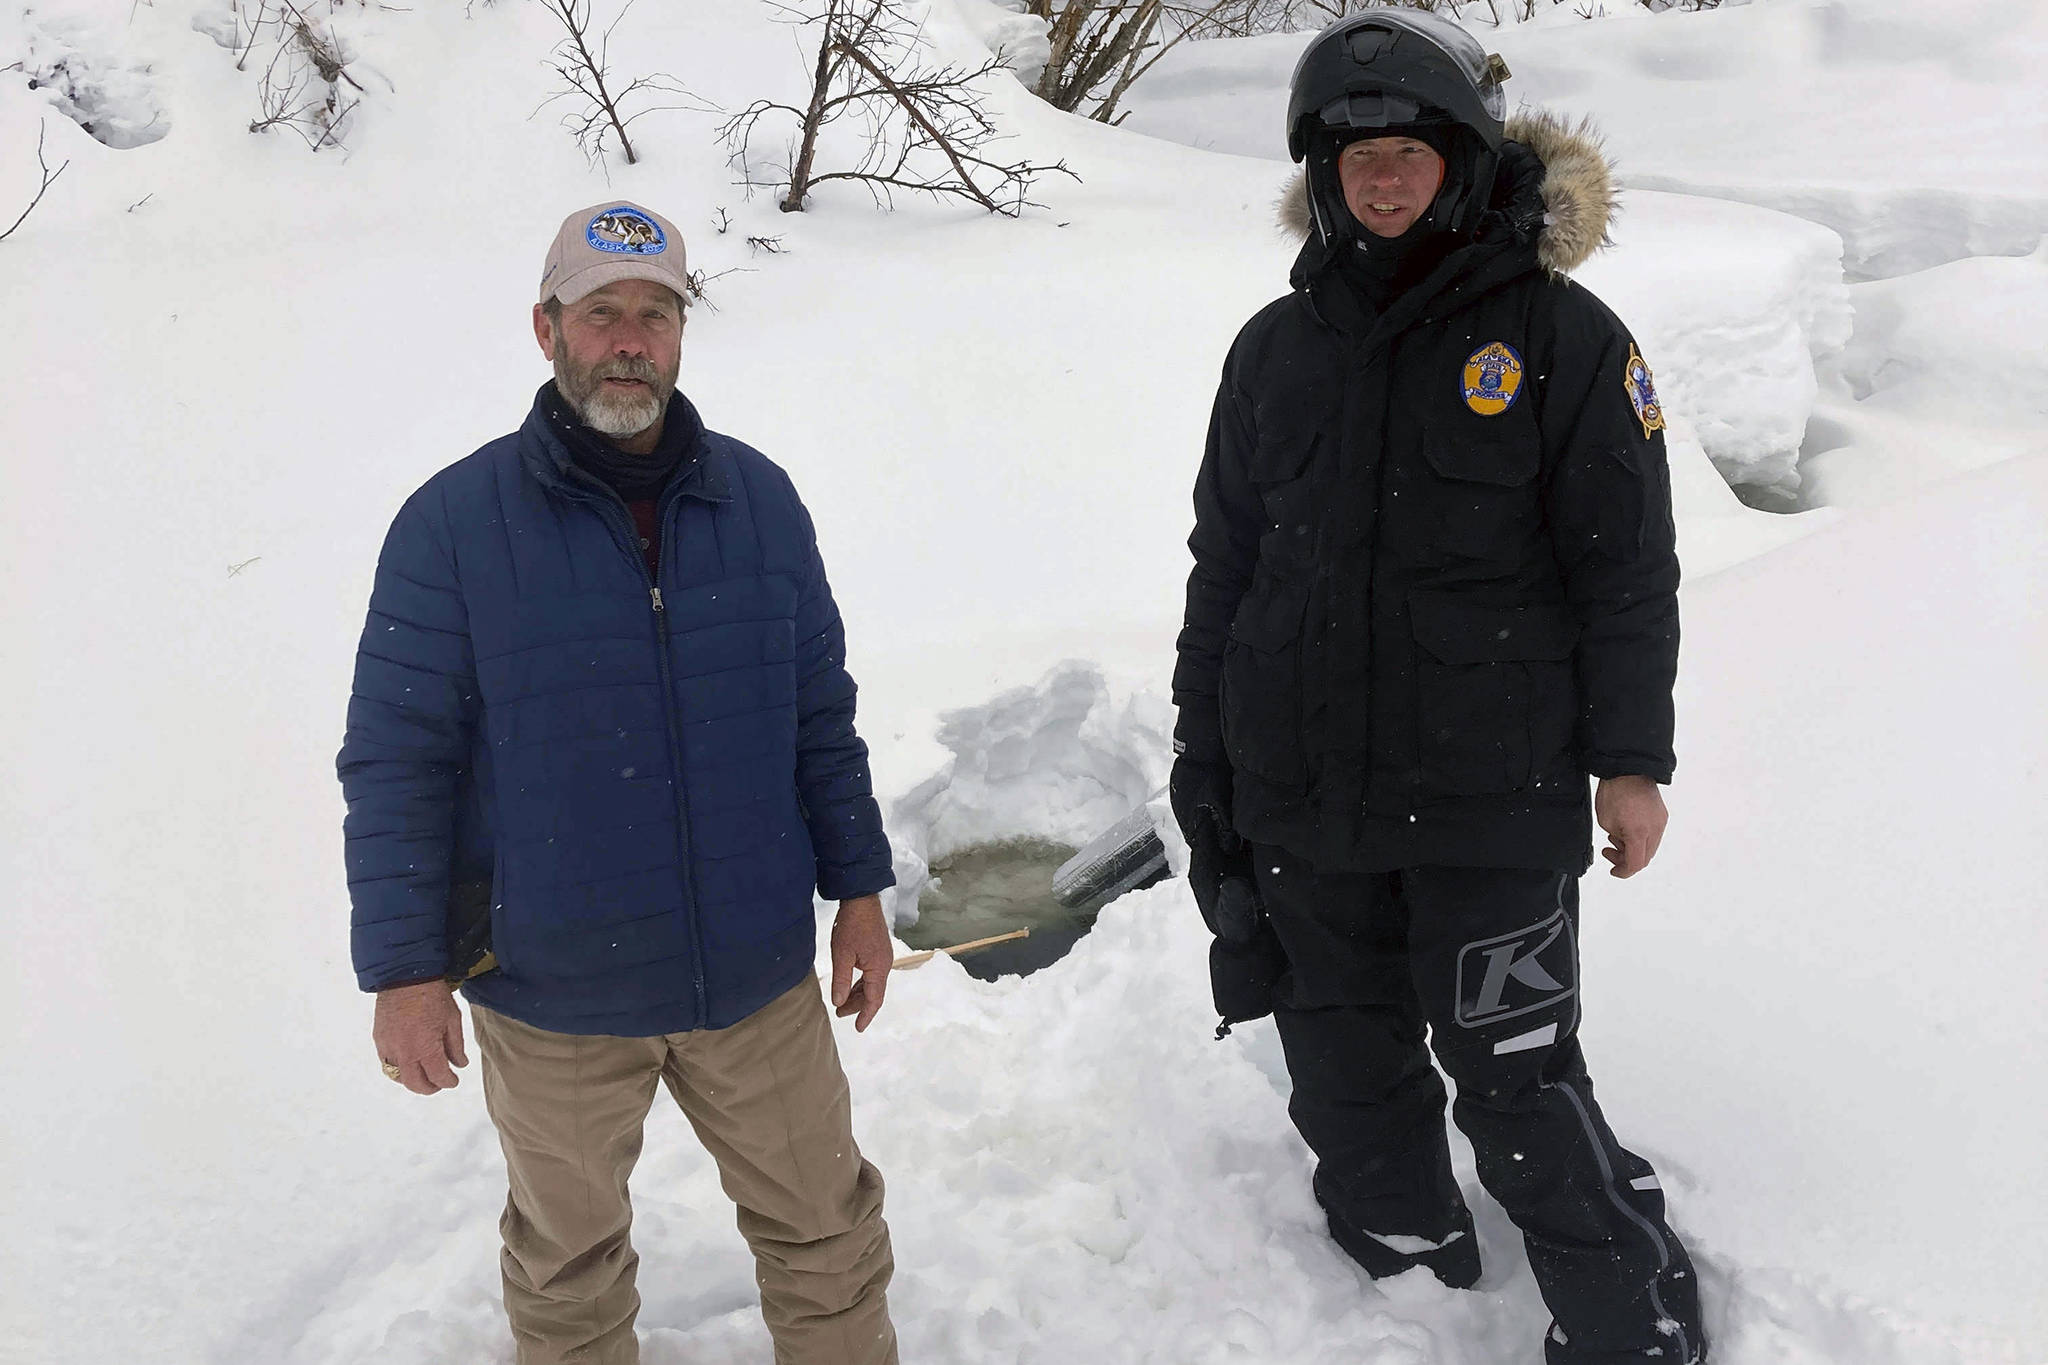 This photo provided by the Alaska Wildlife Troopers taken March 9, 2021, Doug Ramsey, left, of Sundance Wyoming, poses with Alaska Wildlife Trooper Jason Kneier near a hole in the ice of a river in Swentna, Alaska. The two helped pull an 8-year-old boy from the water after he fell into the river. (Alaska Wildlife Troopers)